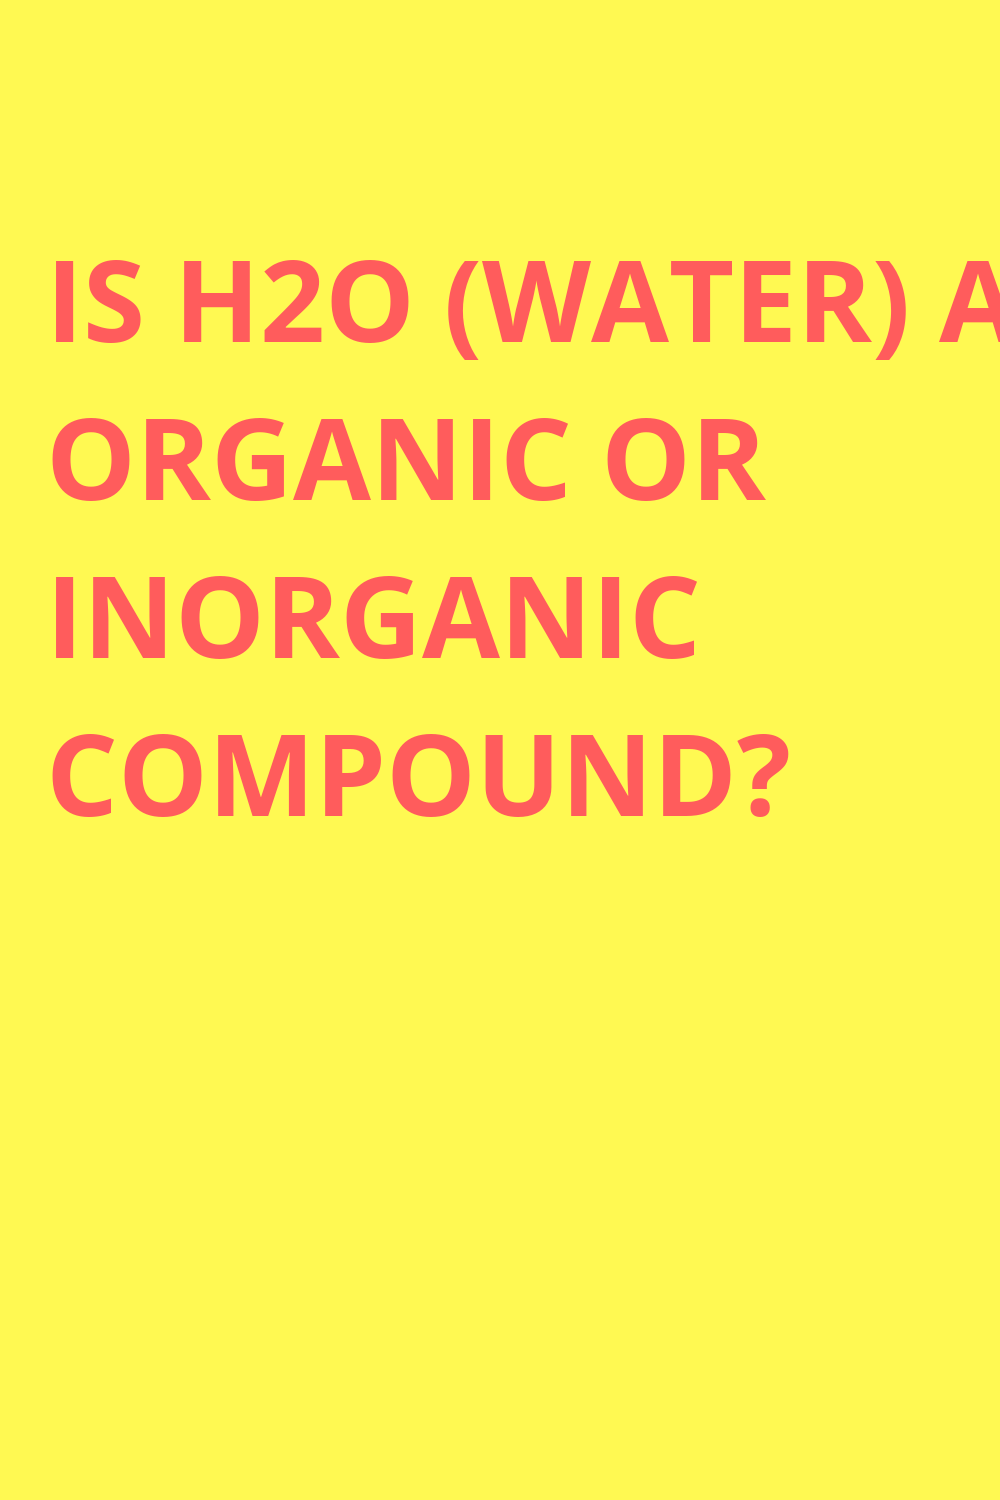 Is H2O (water) an organic or inorganic compound?